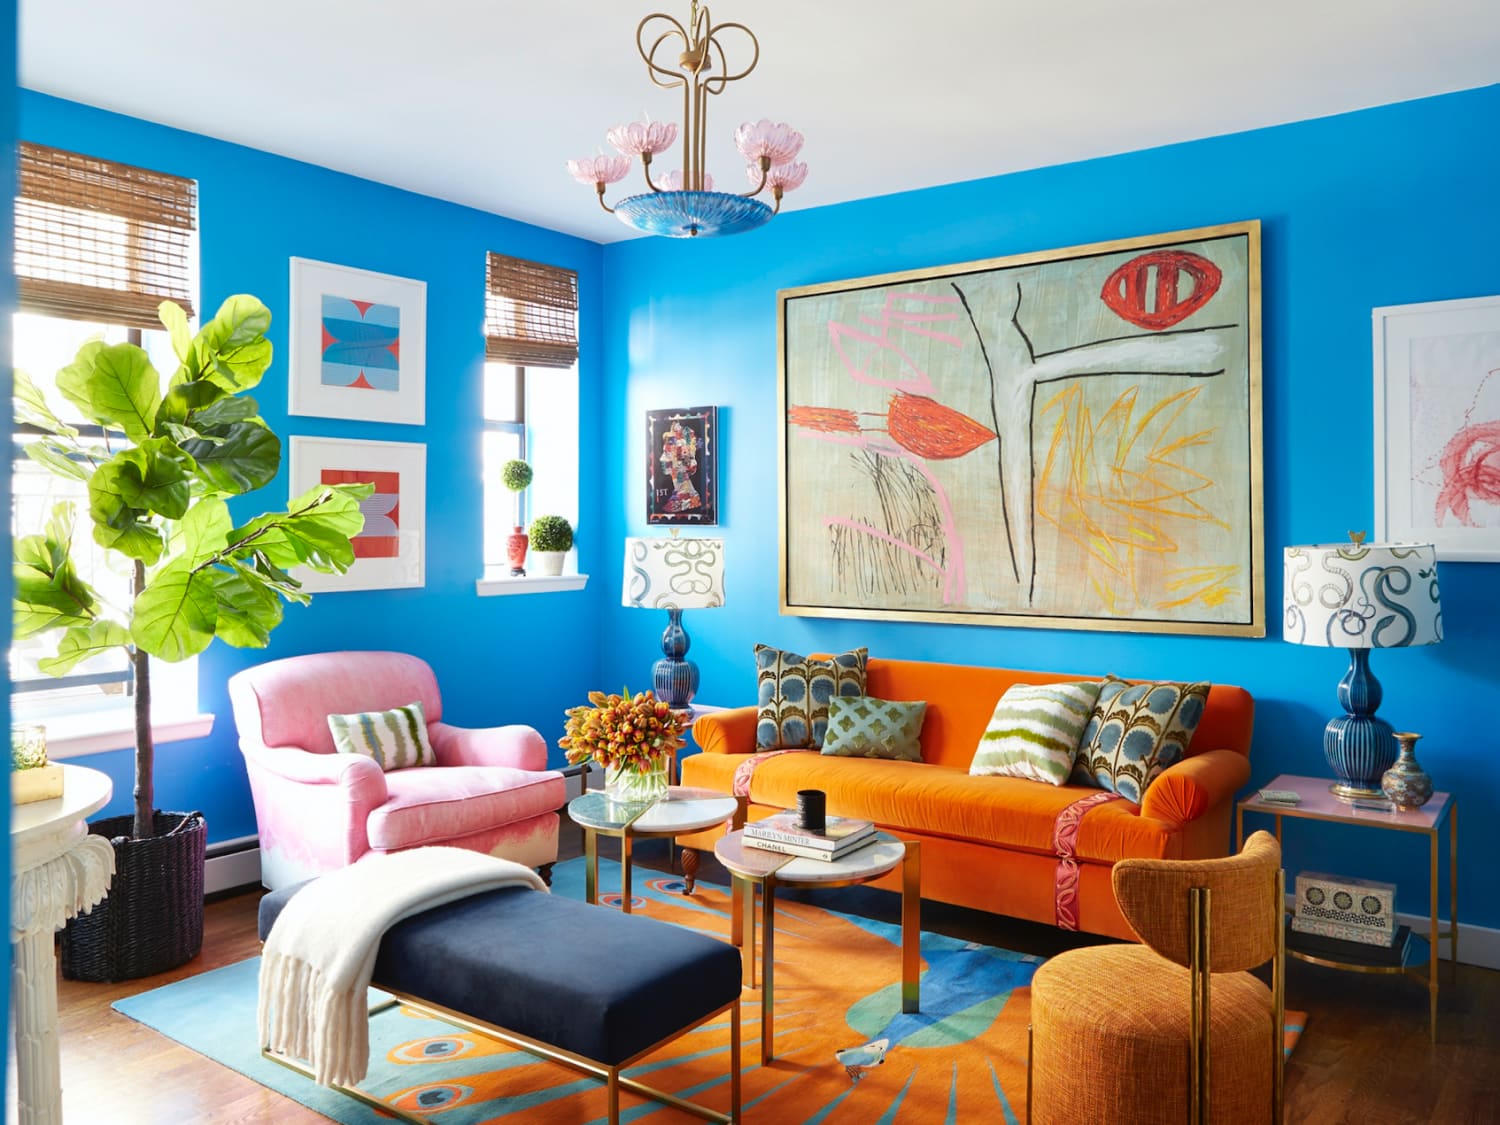 A Colorful Maximalist Home in London - The Nordroom